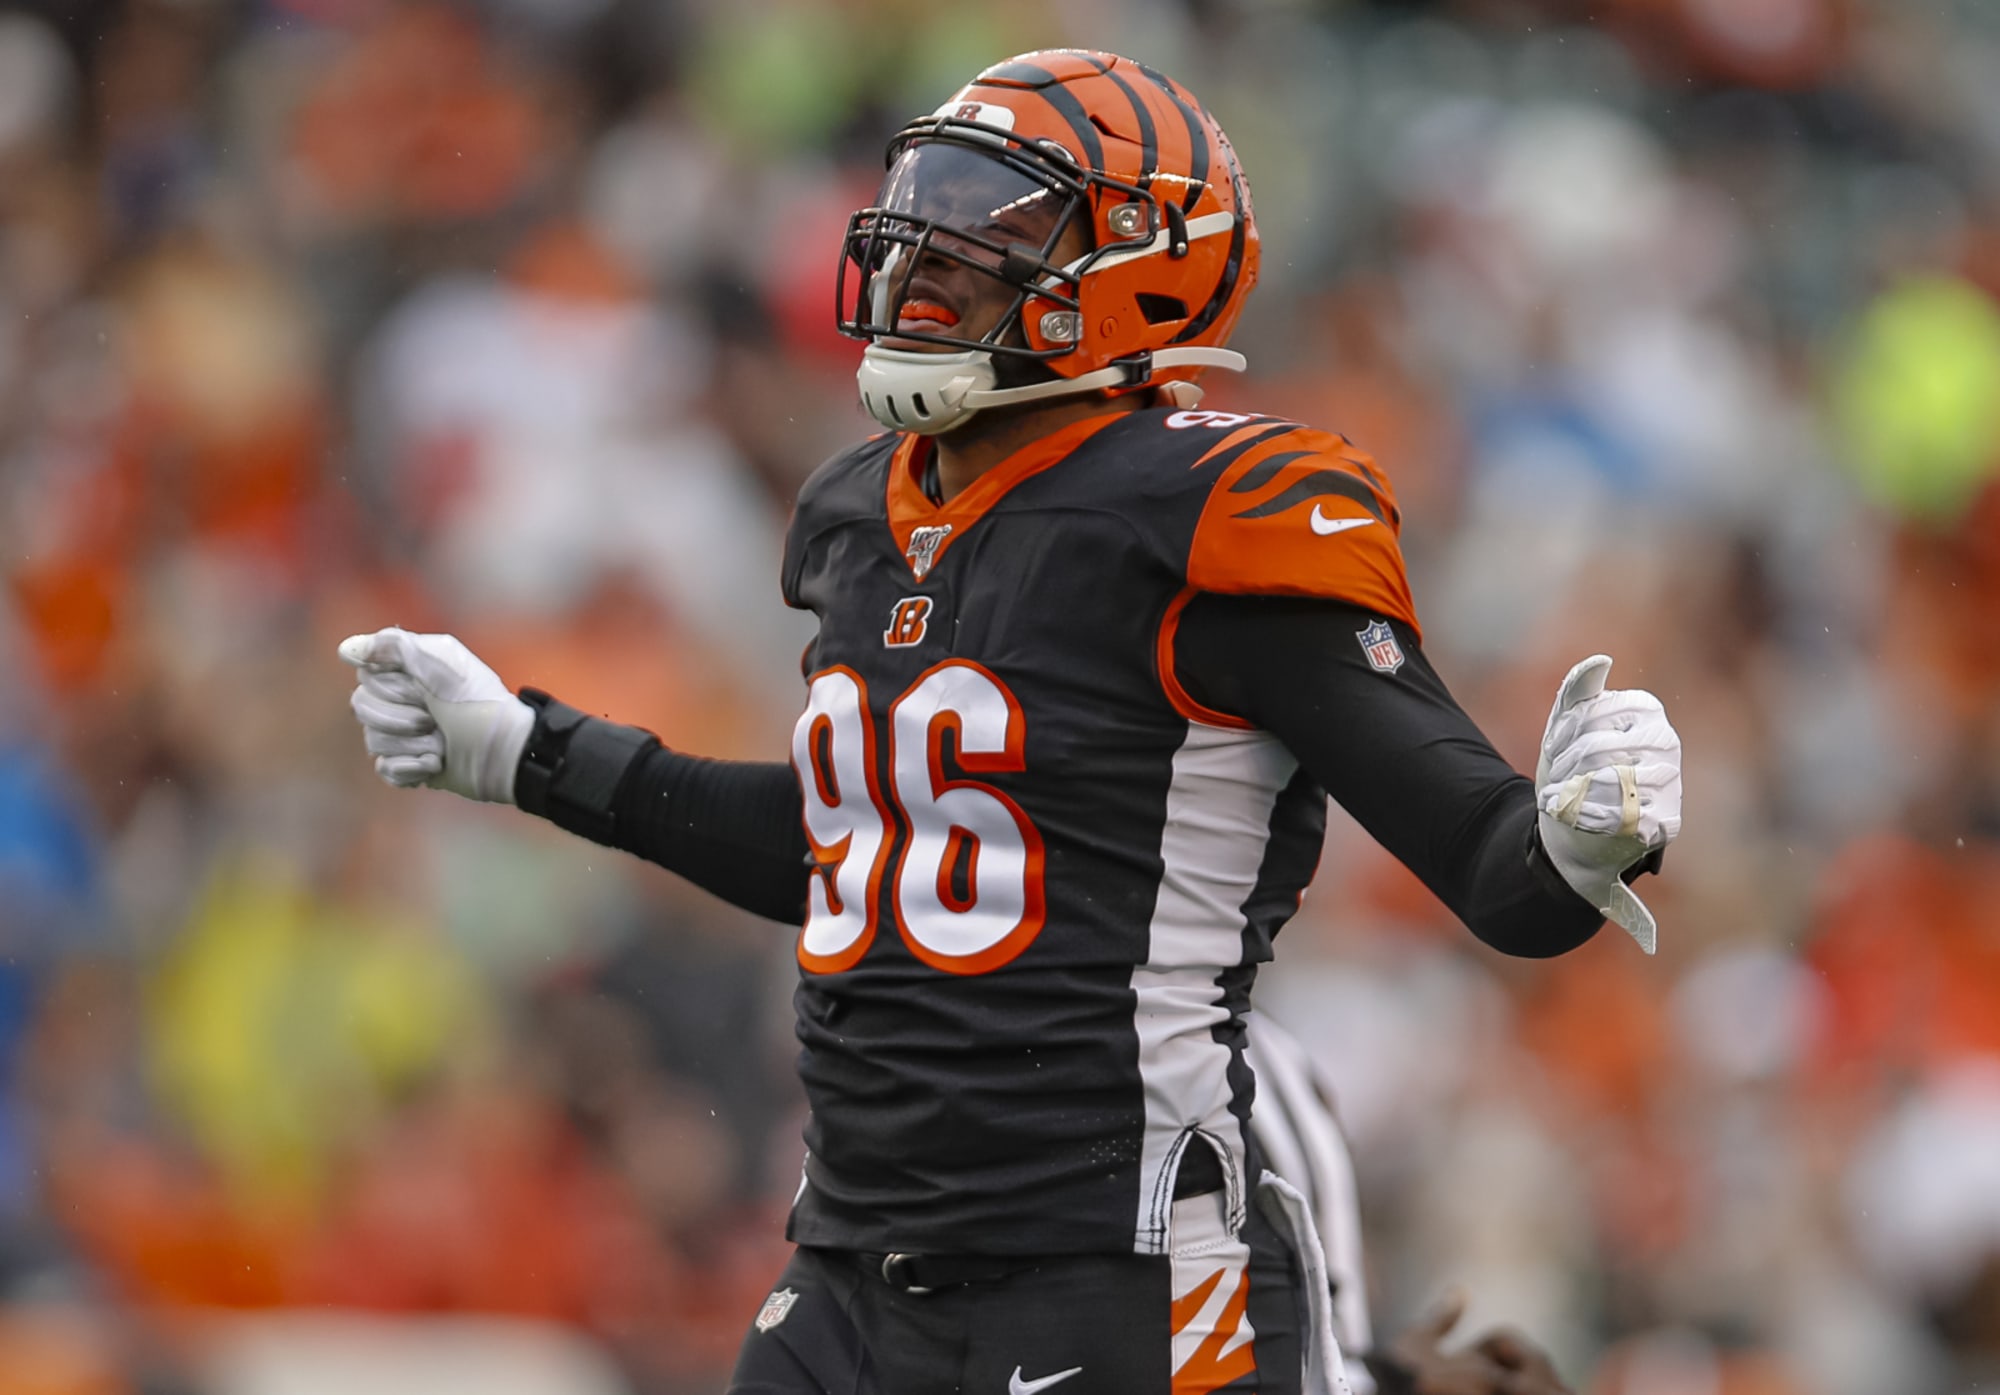 The Green Bay Packers could use depth at edge rusher, and Carlos Dunlap could be the answer